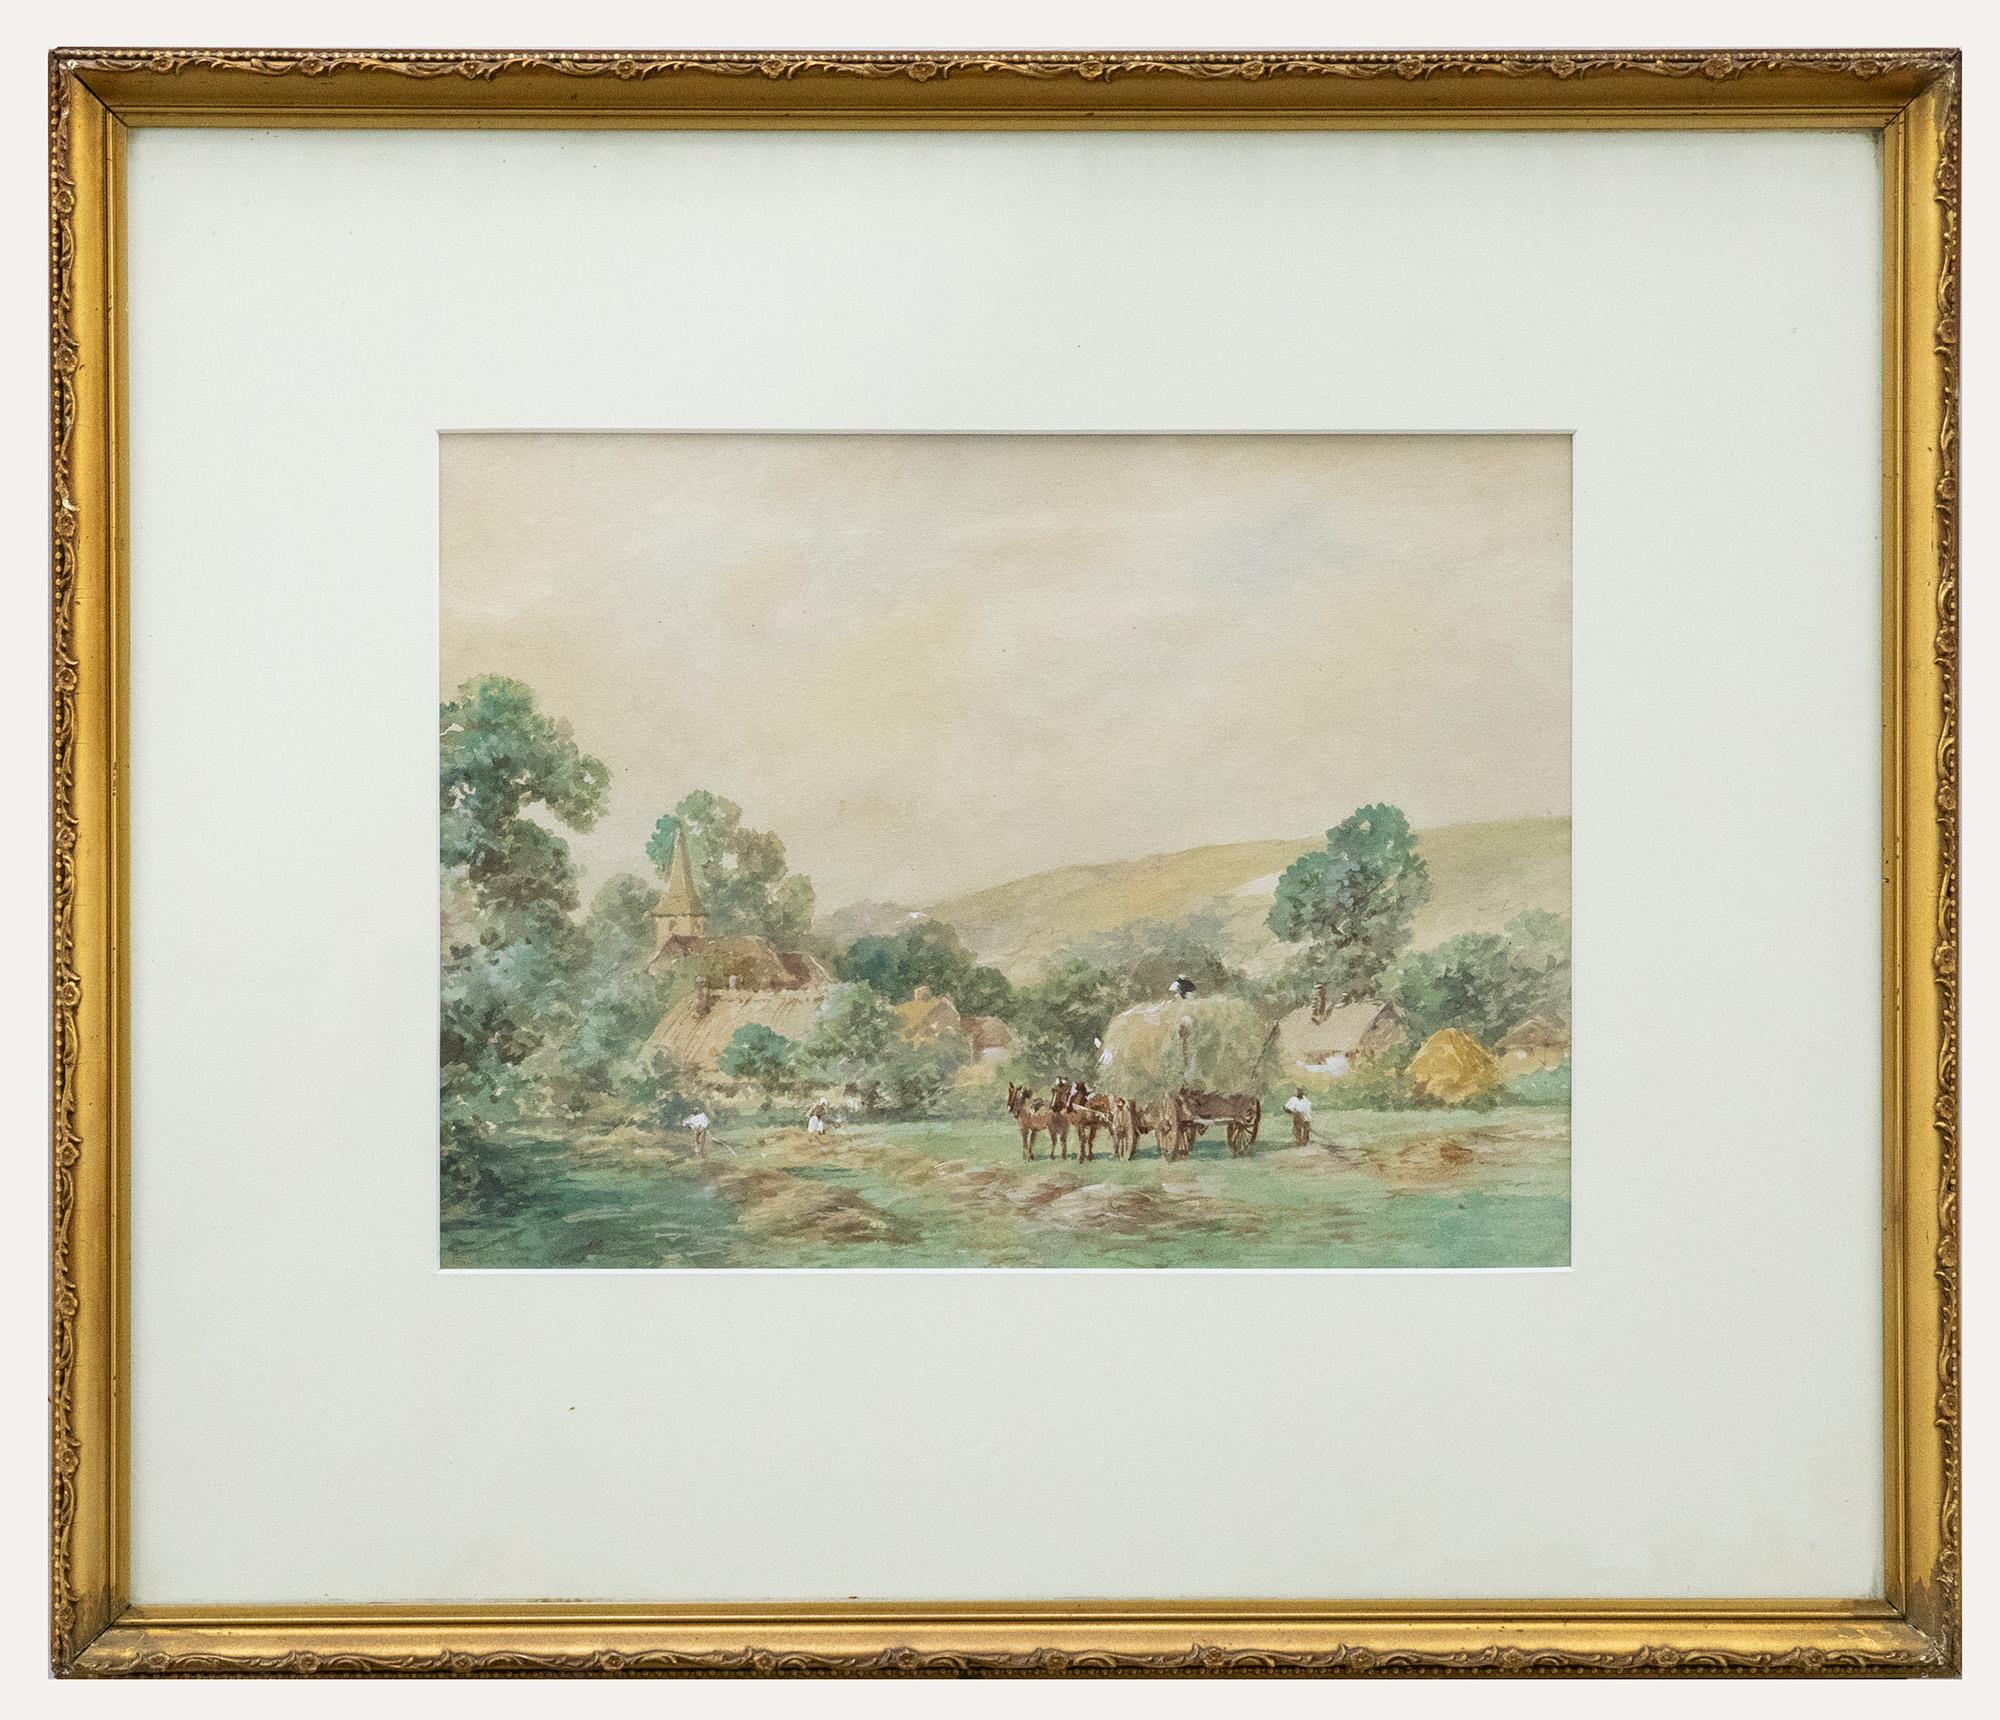 Unknown Landscape Art - S. McKinley (b.1920) - Early 20th Century Watercolour, The Last of the Hay